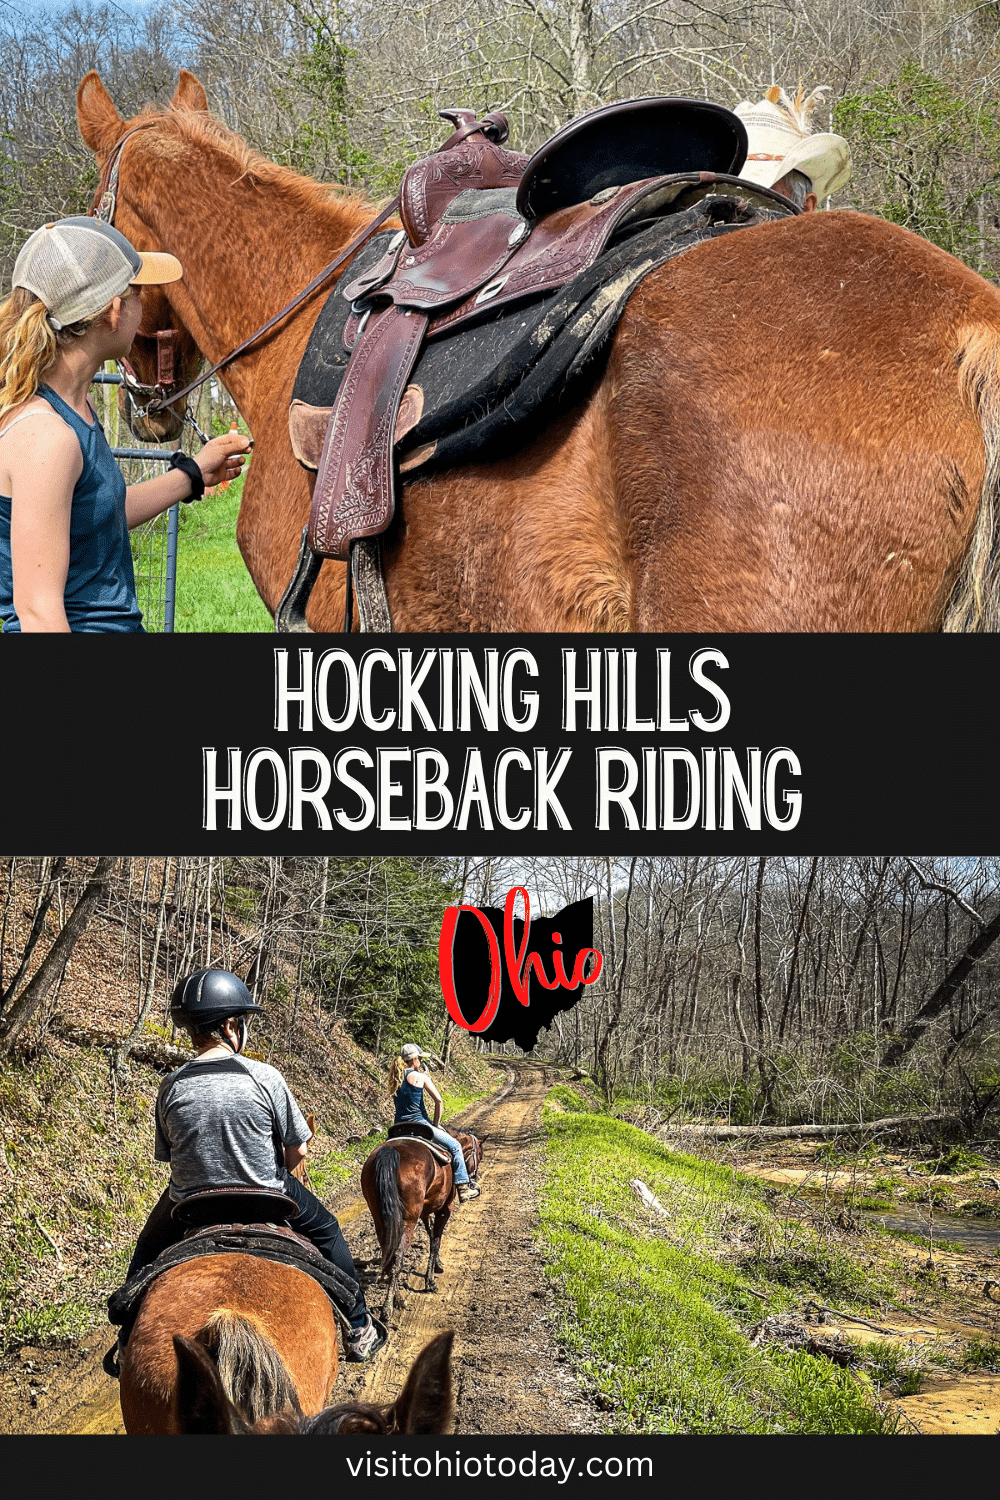 vertical image with two photos of horseback riding in Hocking Hills. A black strip across the middle has the text Hocking Hills Horseback Riding Photo credit: Cindy Gordon of VisitOhioToday.com